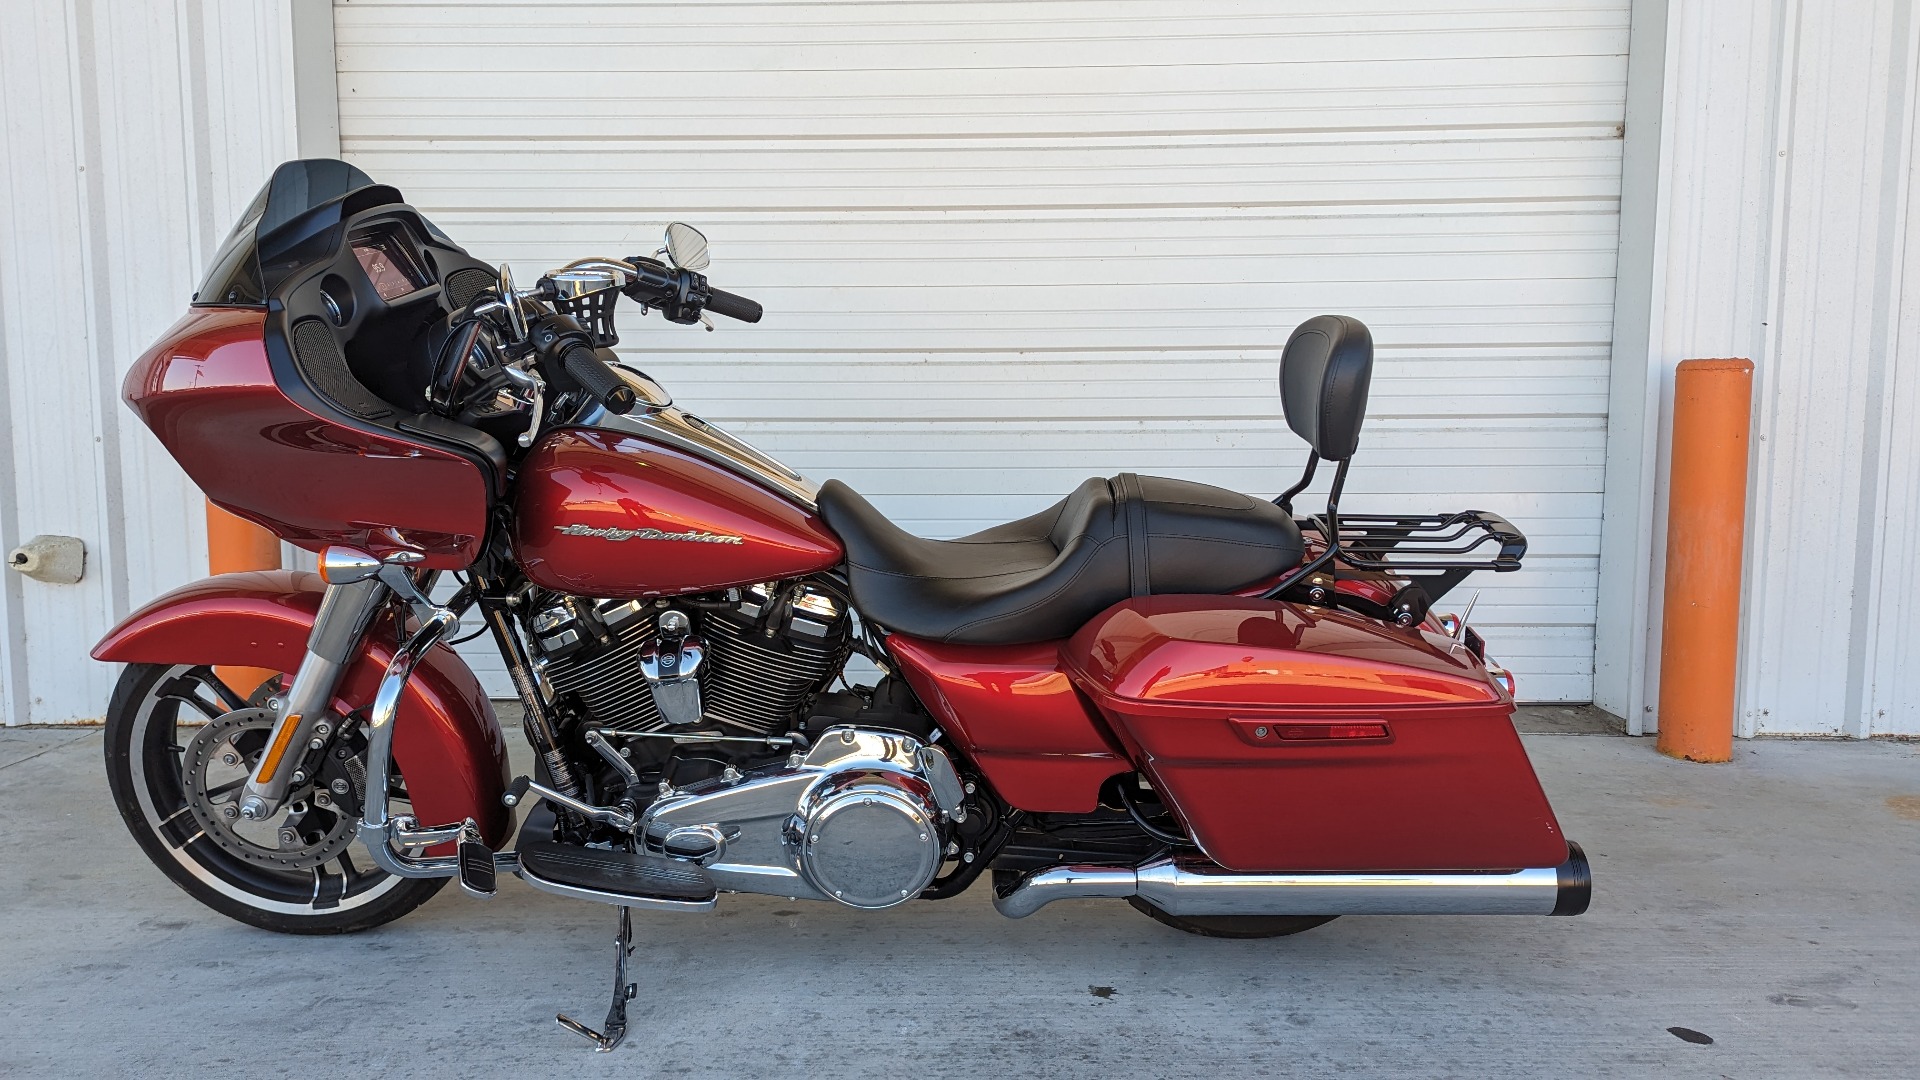 2019 harley davidson road glide wicked red for sale in louisiana - Photo 2